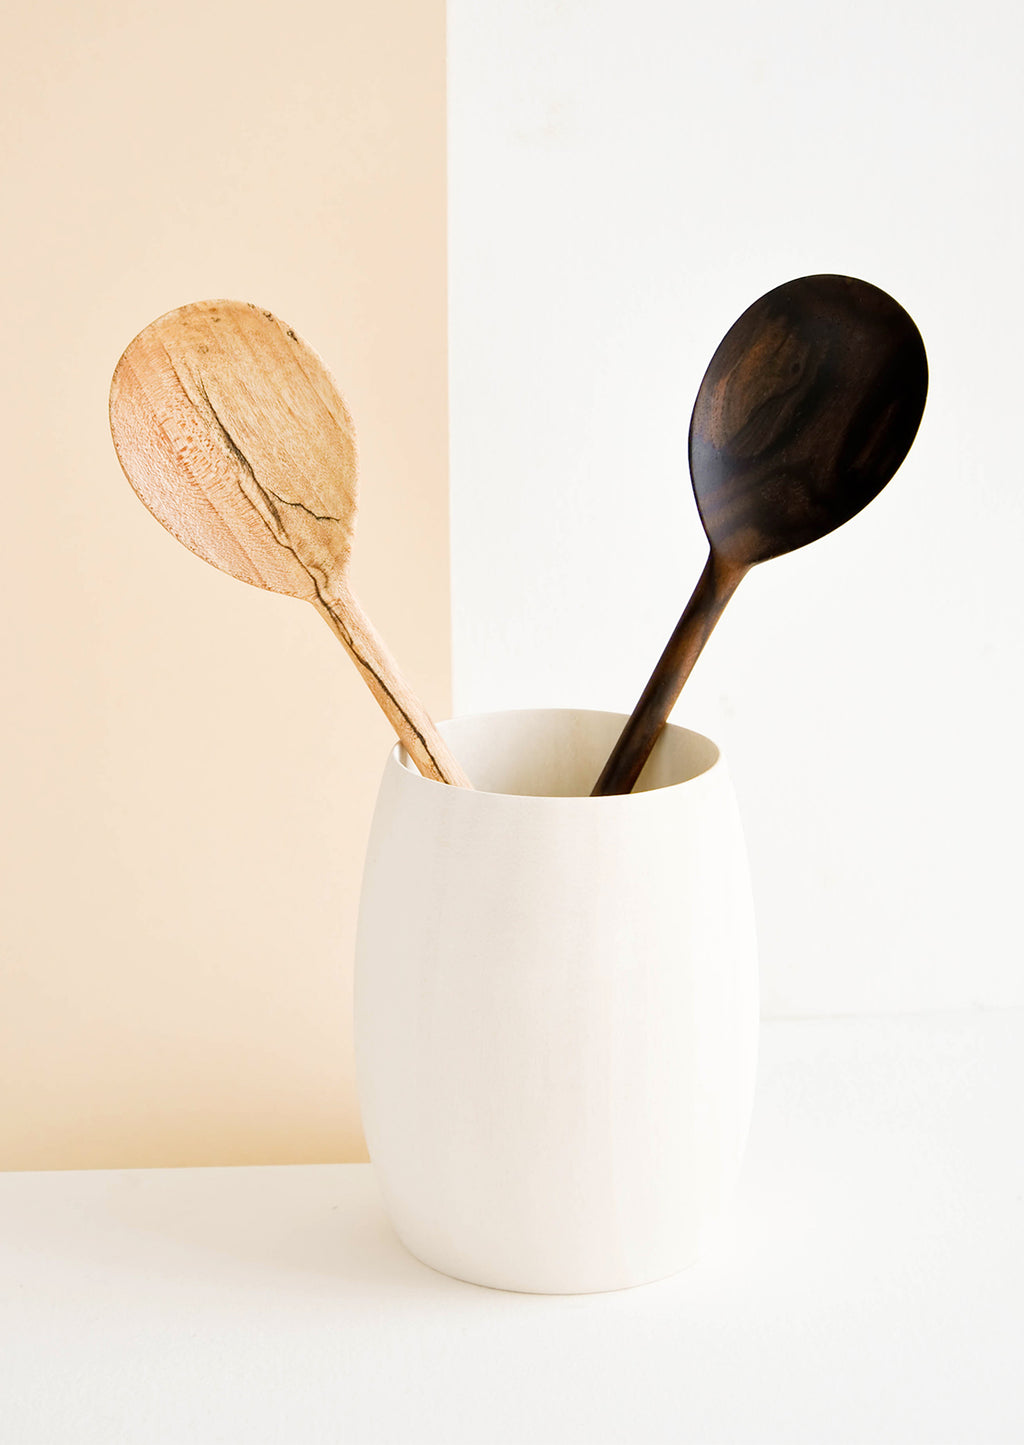 1: Two wooden spoons displayed in a very pale wooden vase-like container.